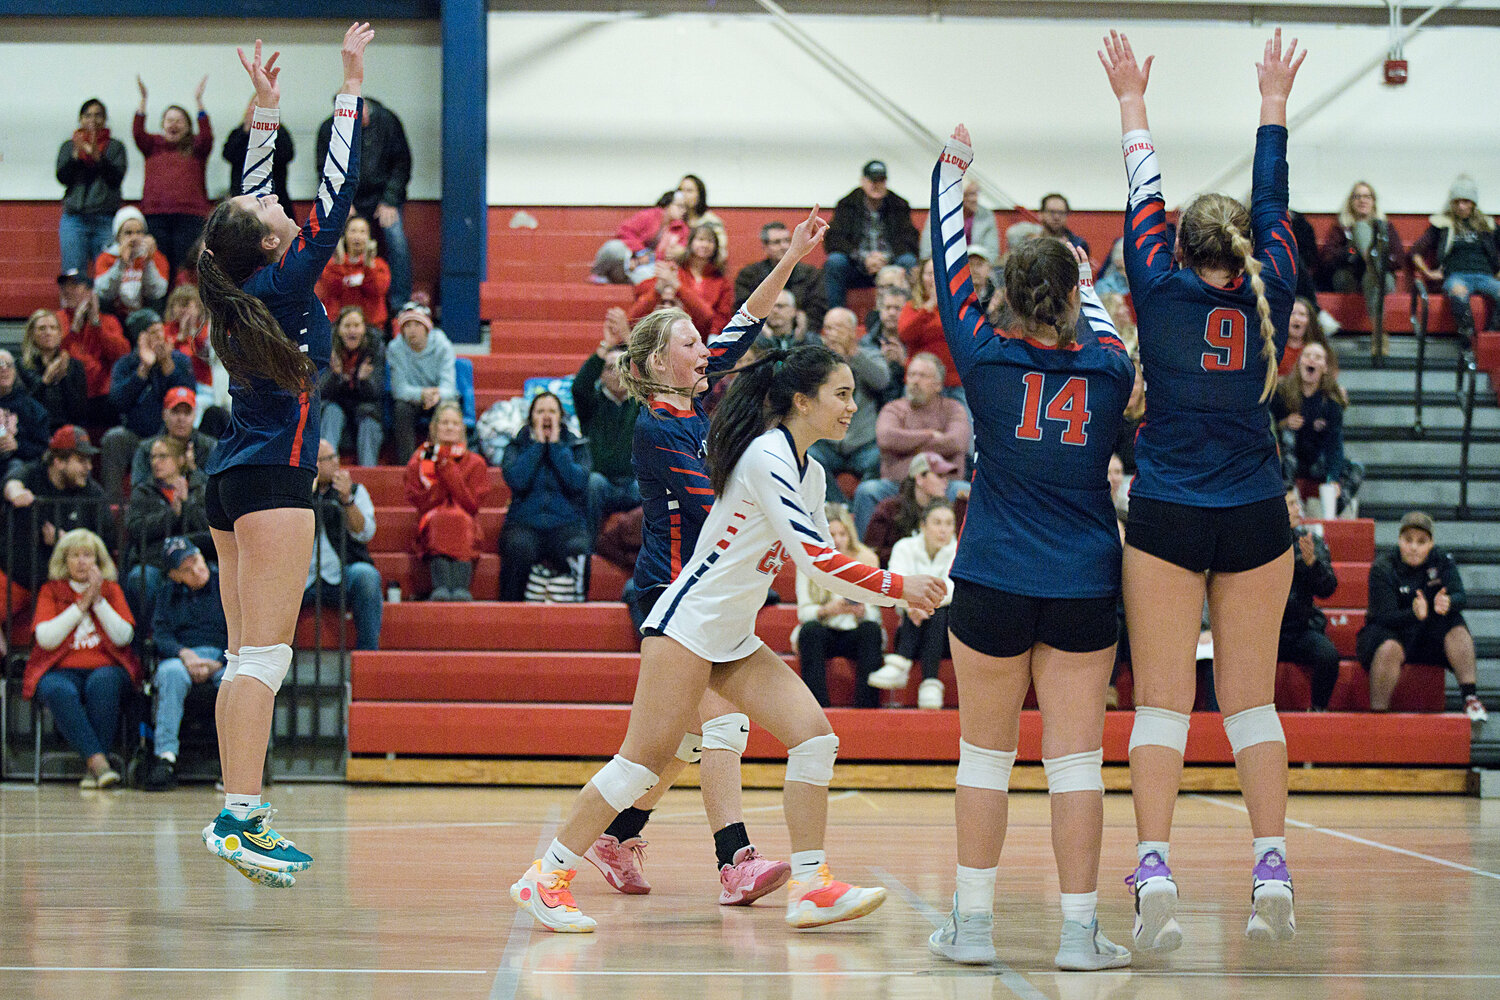 The Patriots celebrate after battling back to win the third set 25-23.